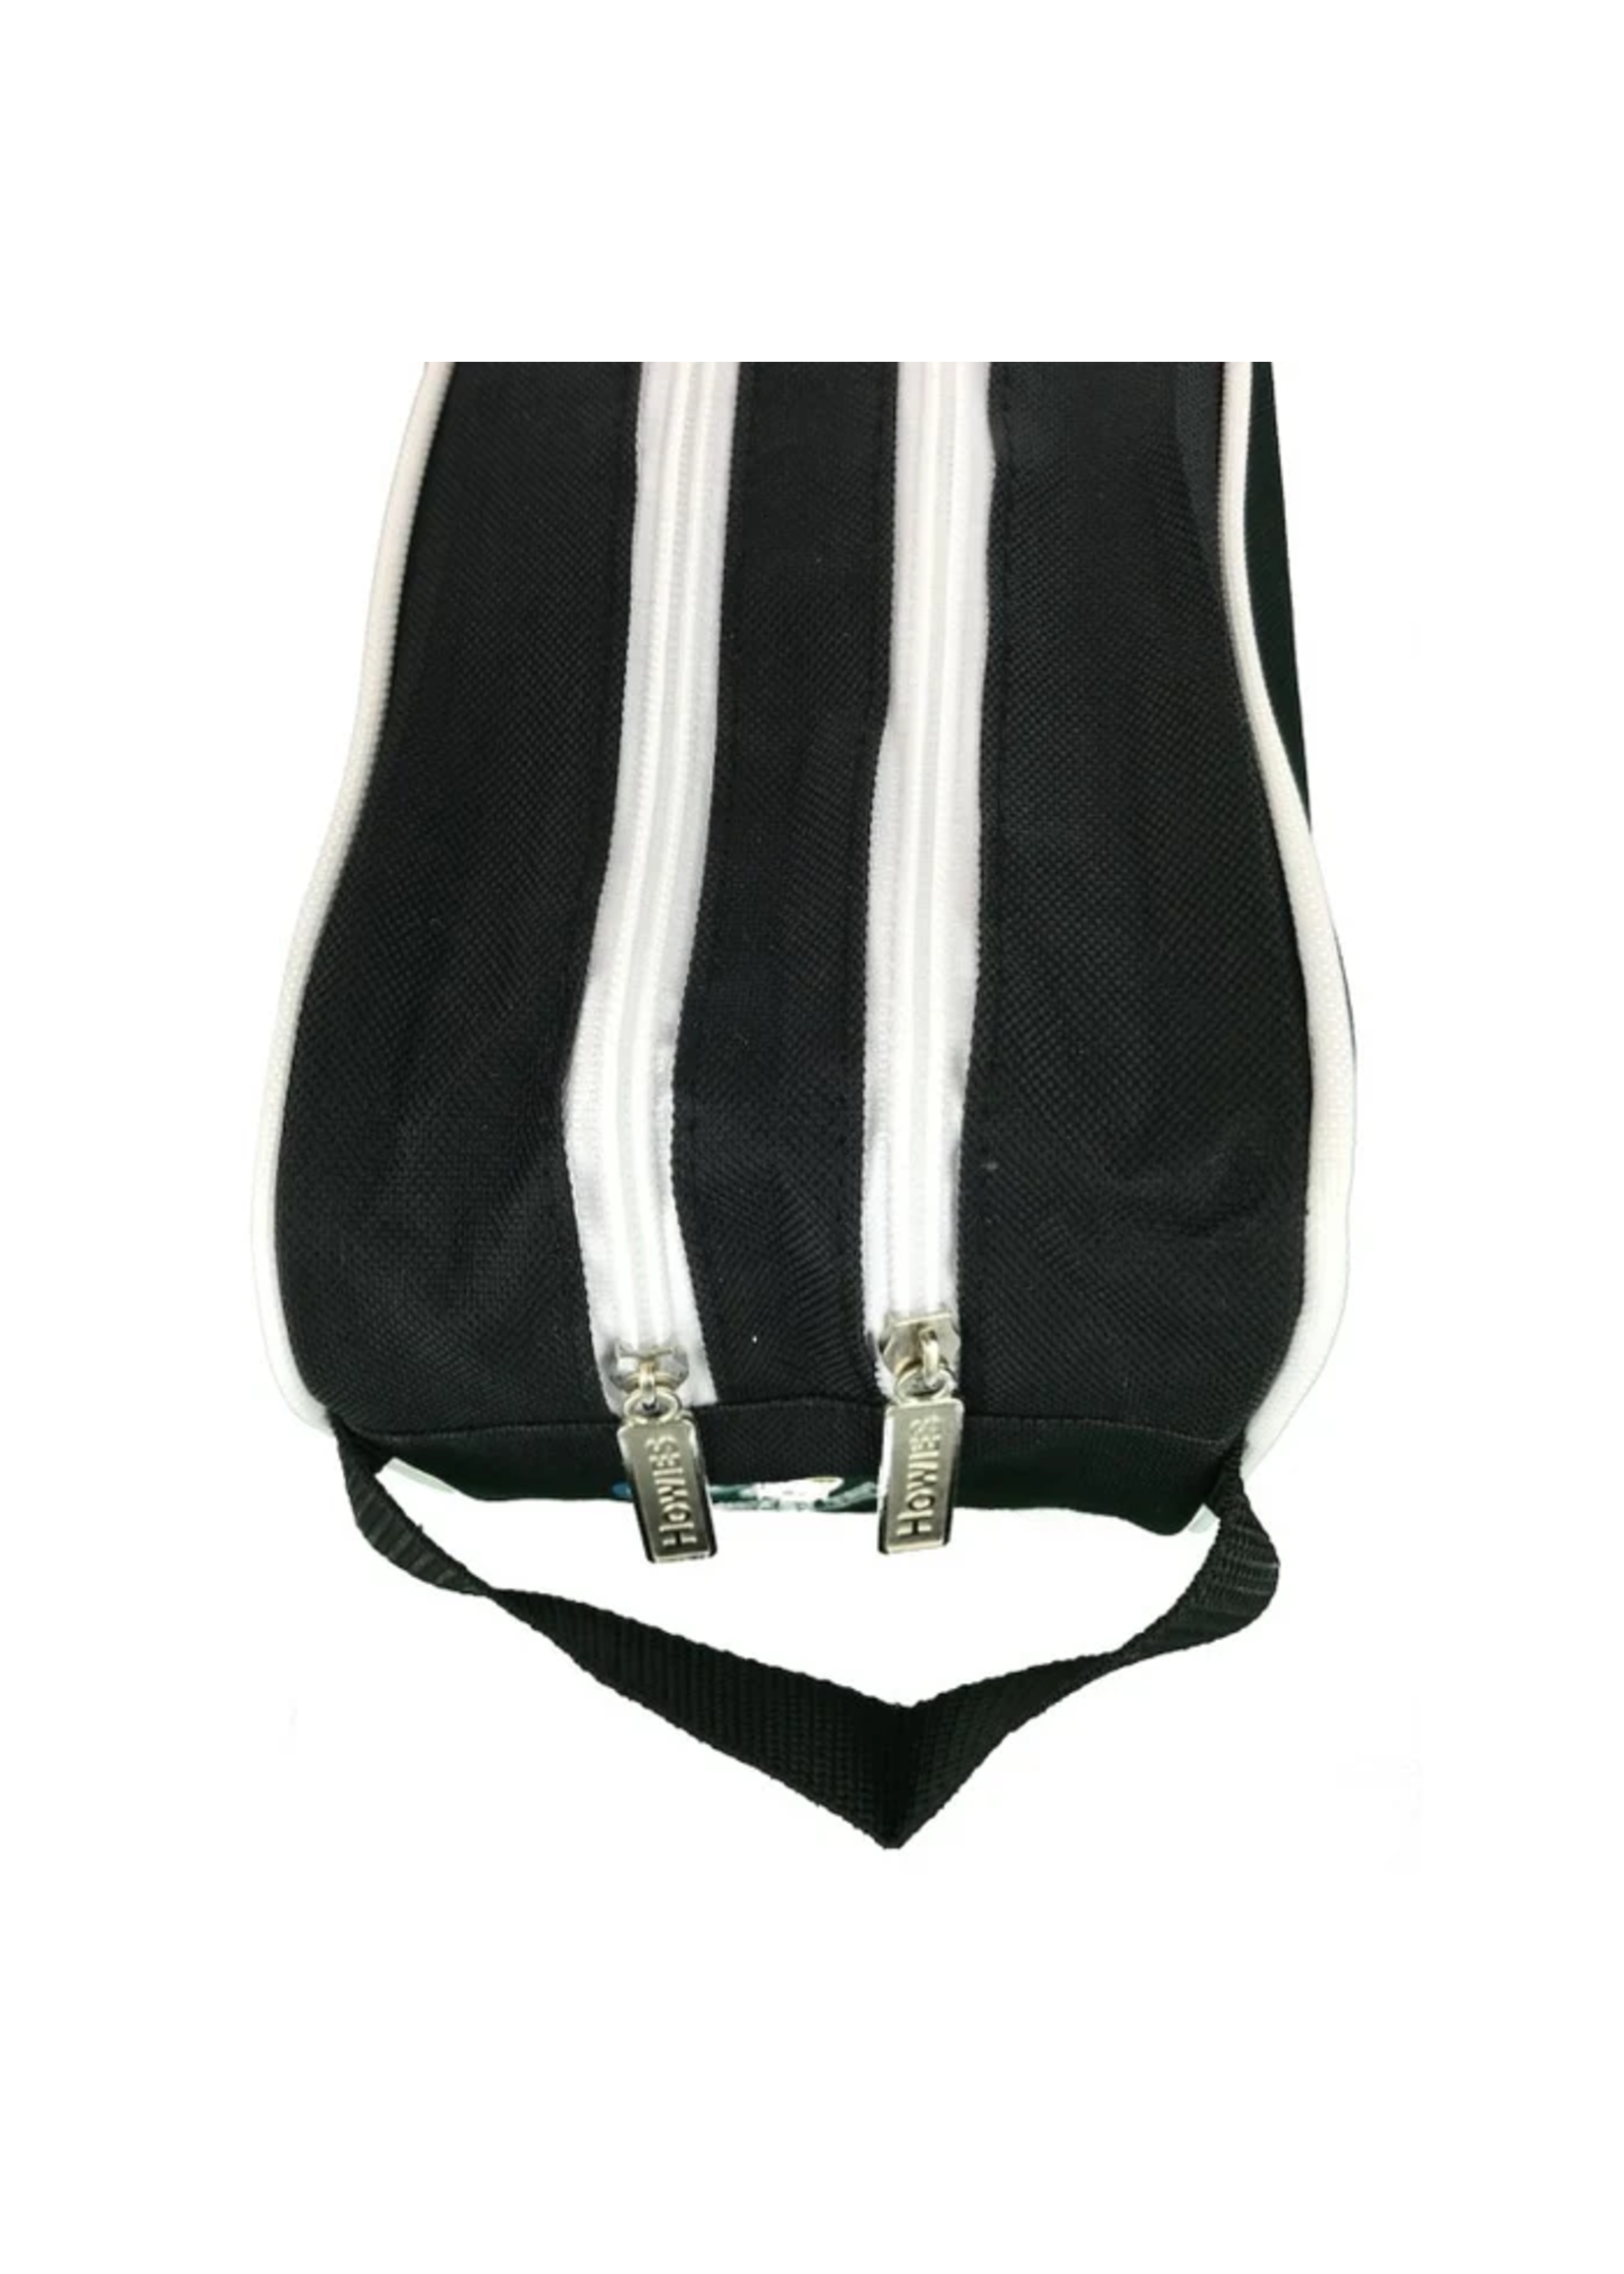 Howies IceCats Accessories Bag